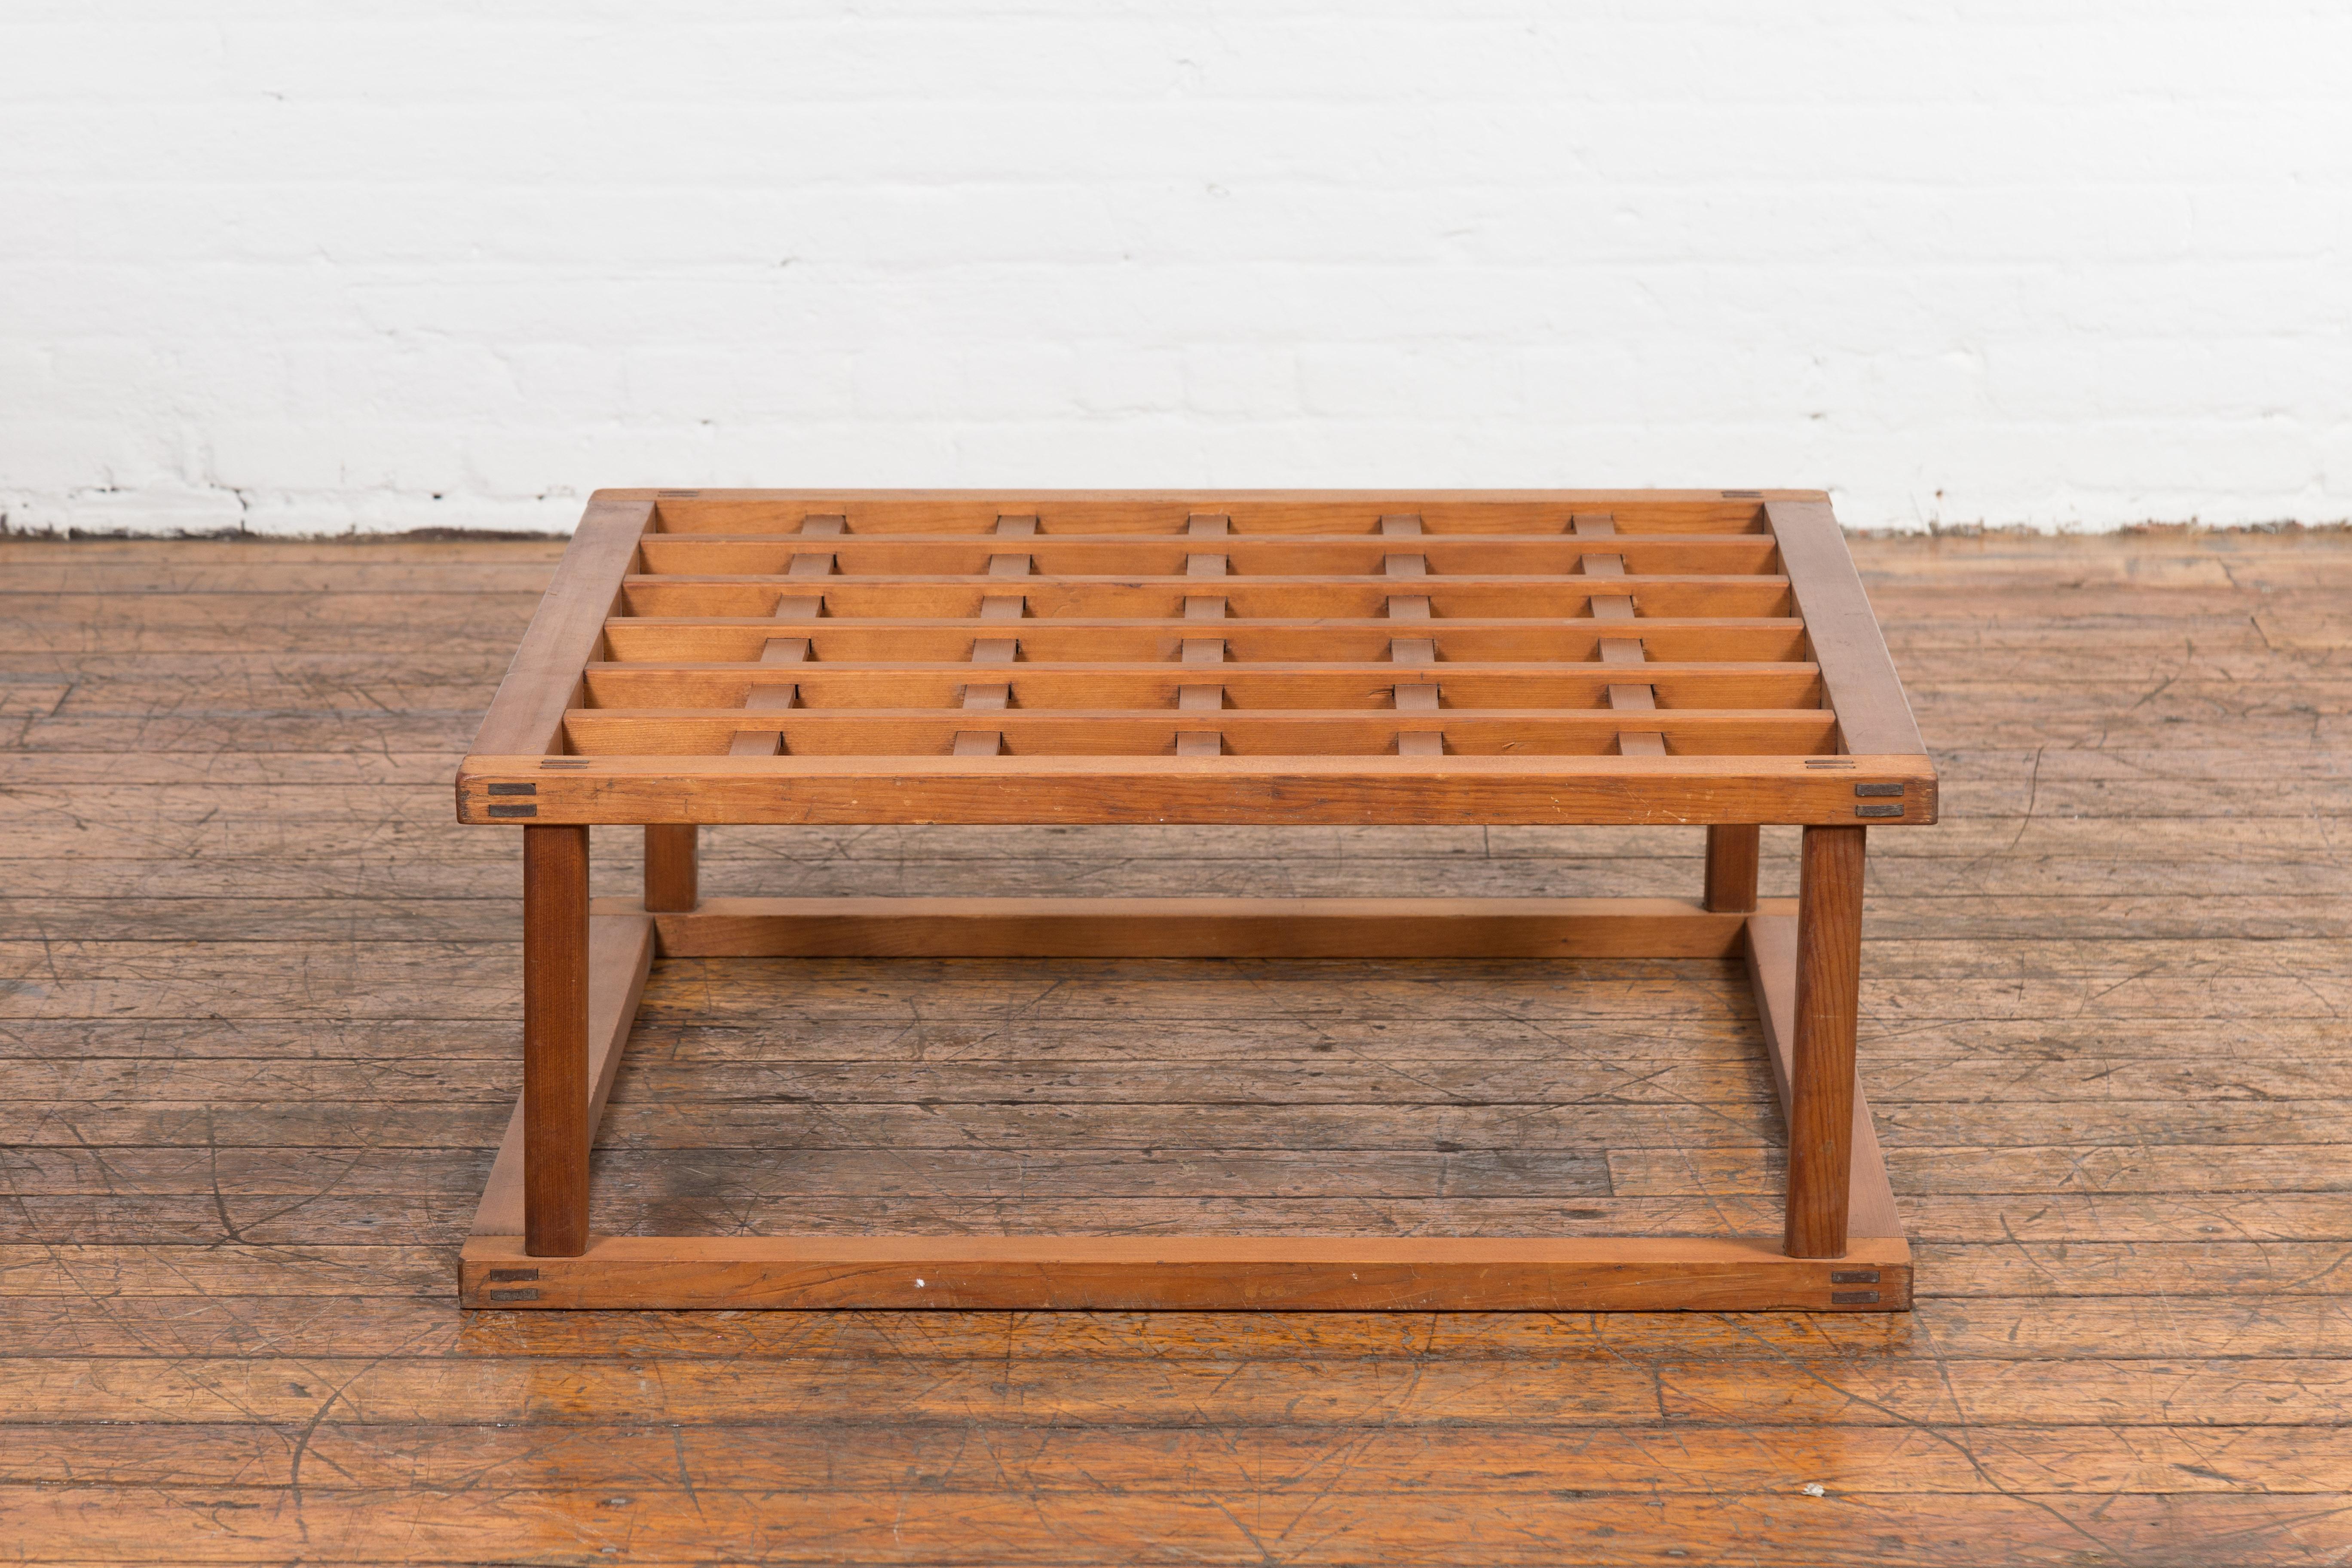 A vintage Japanese hinoki wood Kotatsu coffee table from the mid 20th century with square openwork top, linear silhouette and natural finish. Unfolding an eloquent simplicity, this vintage Japanese Hinoki wood Kotatsu coffee table, hailing from the